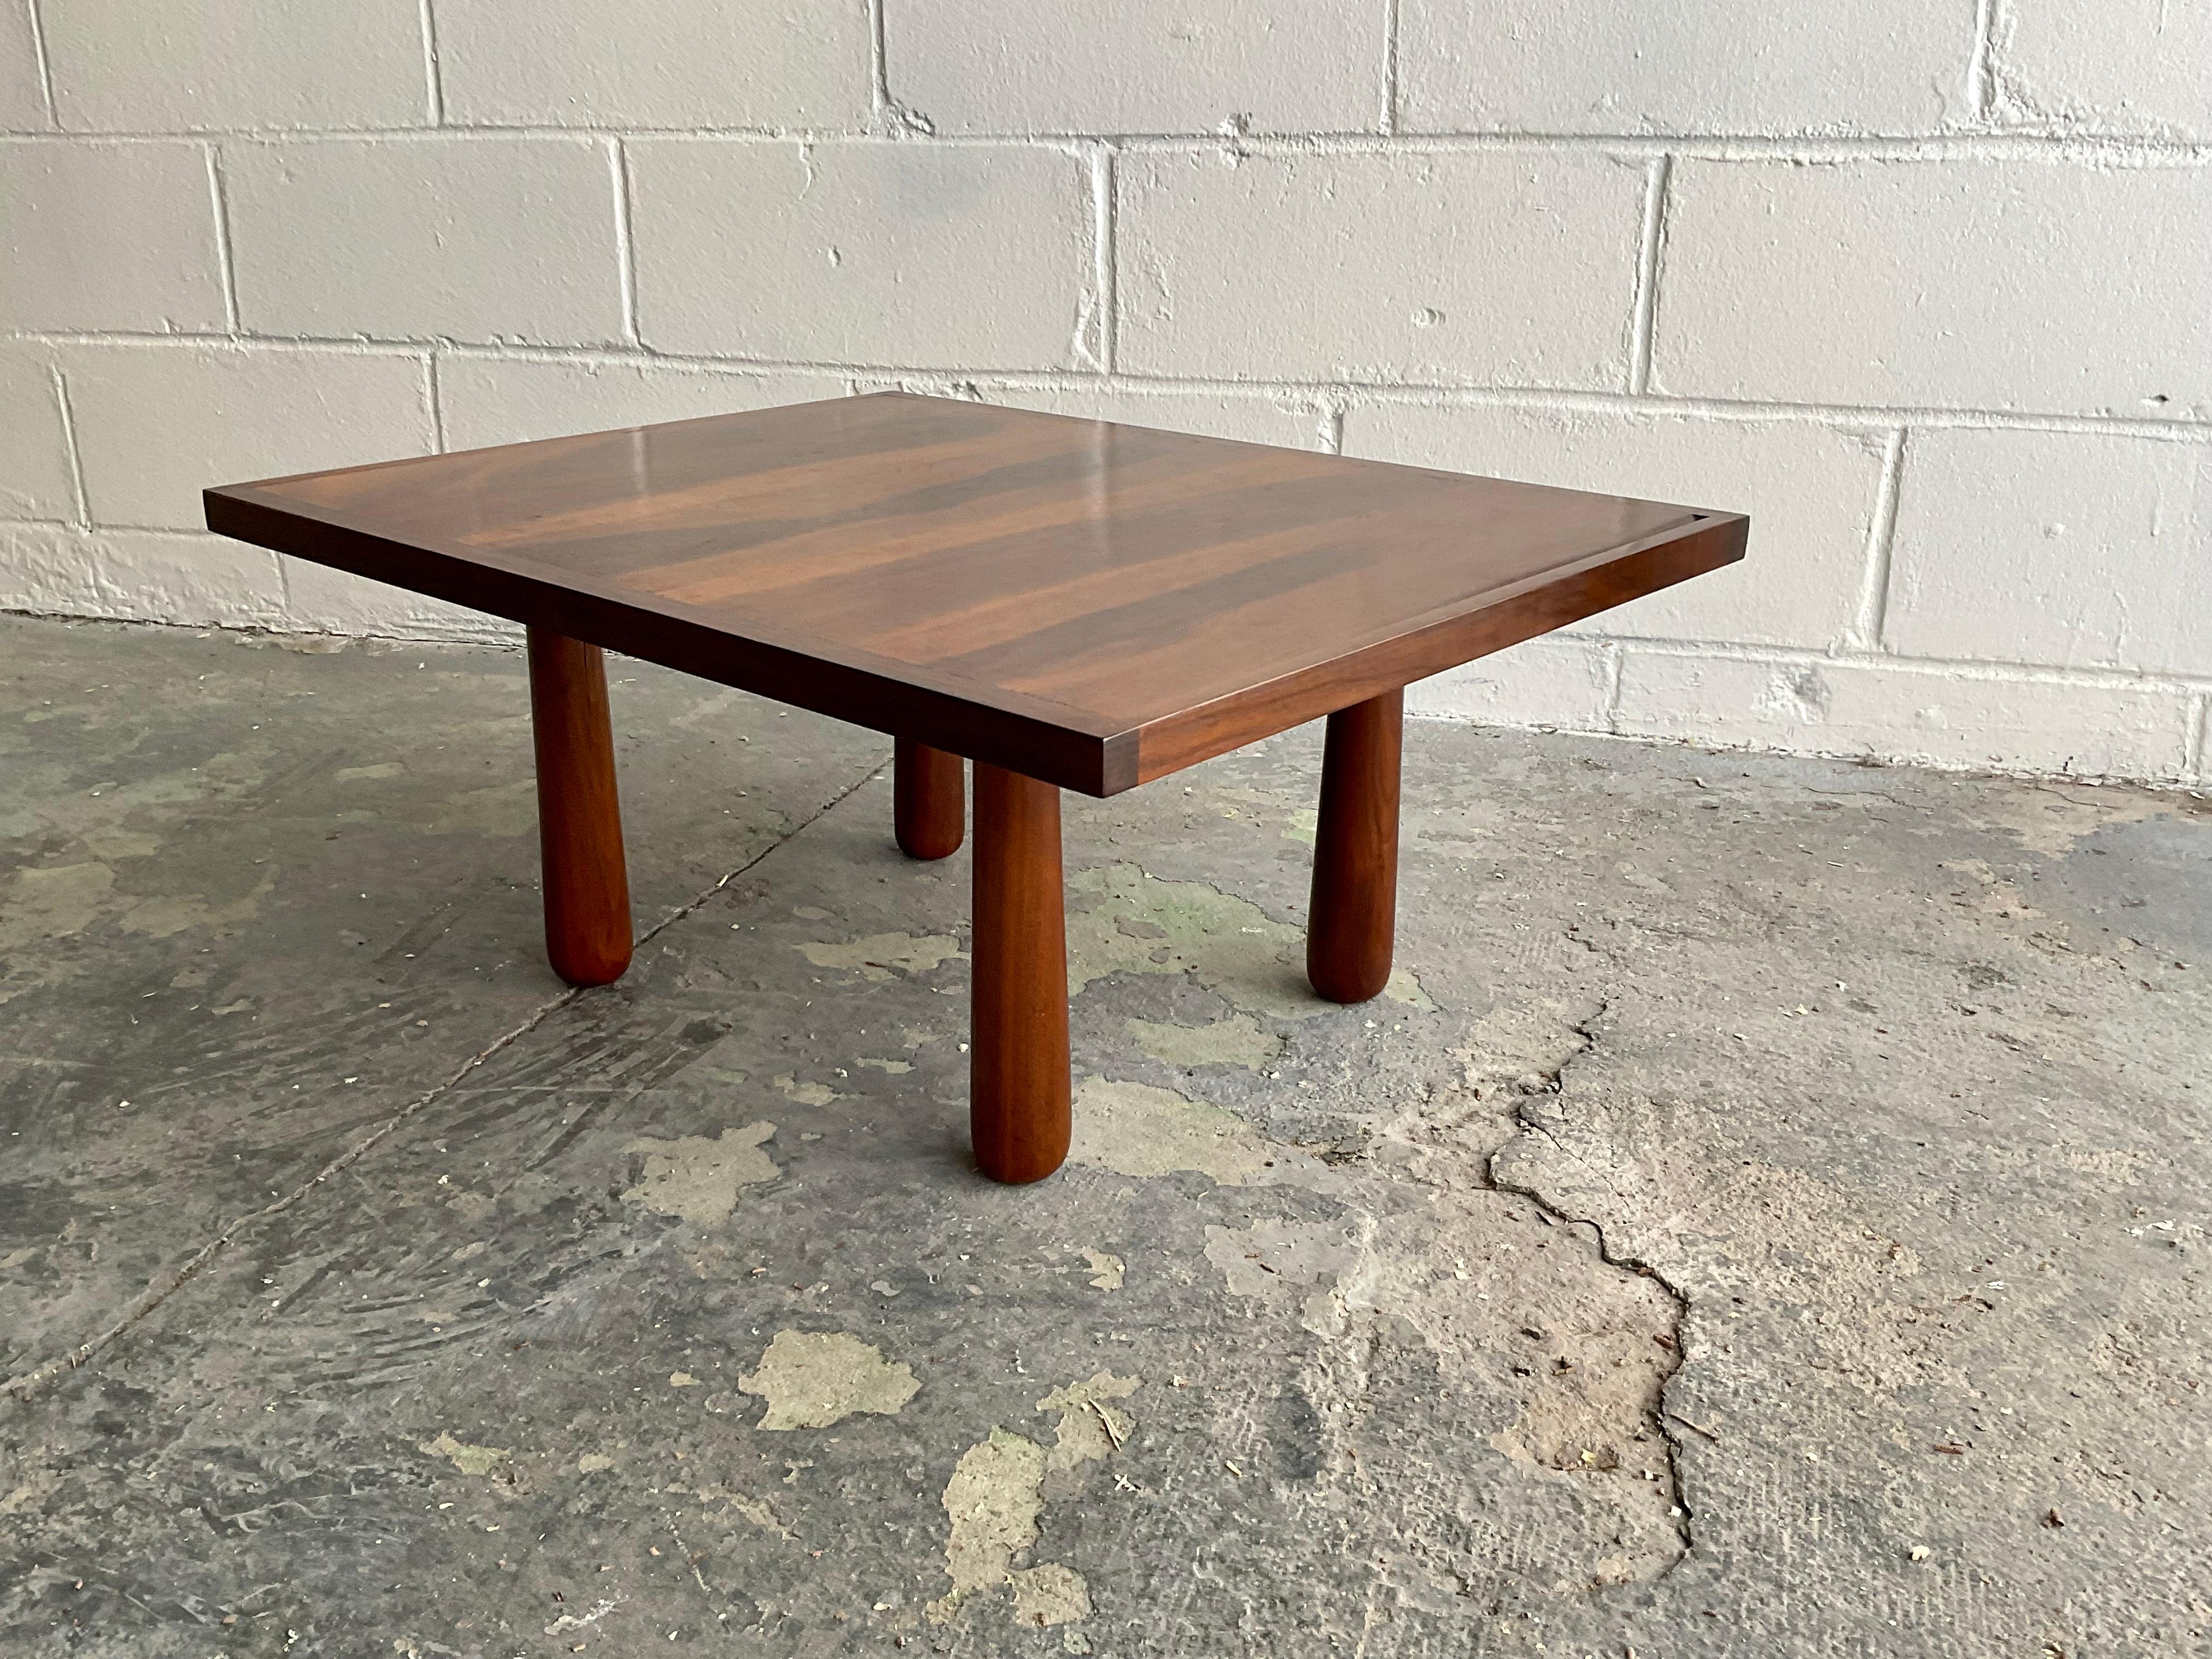 Contemporary Handmade “Oikado” Low Table in Black Walnut by Montaperto Studios, 2023 For Sale